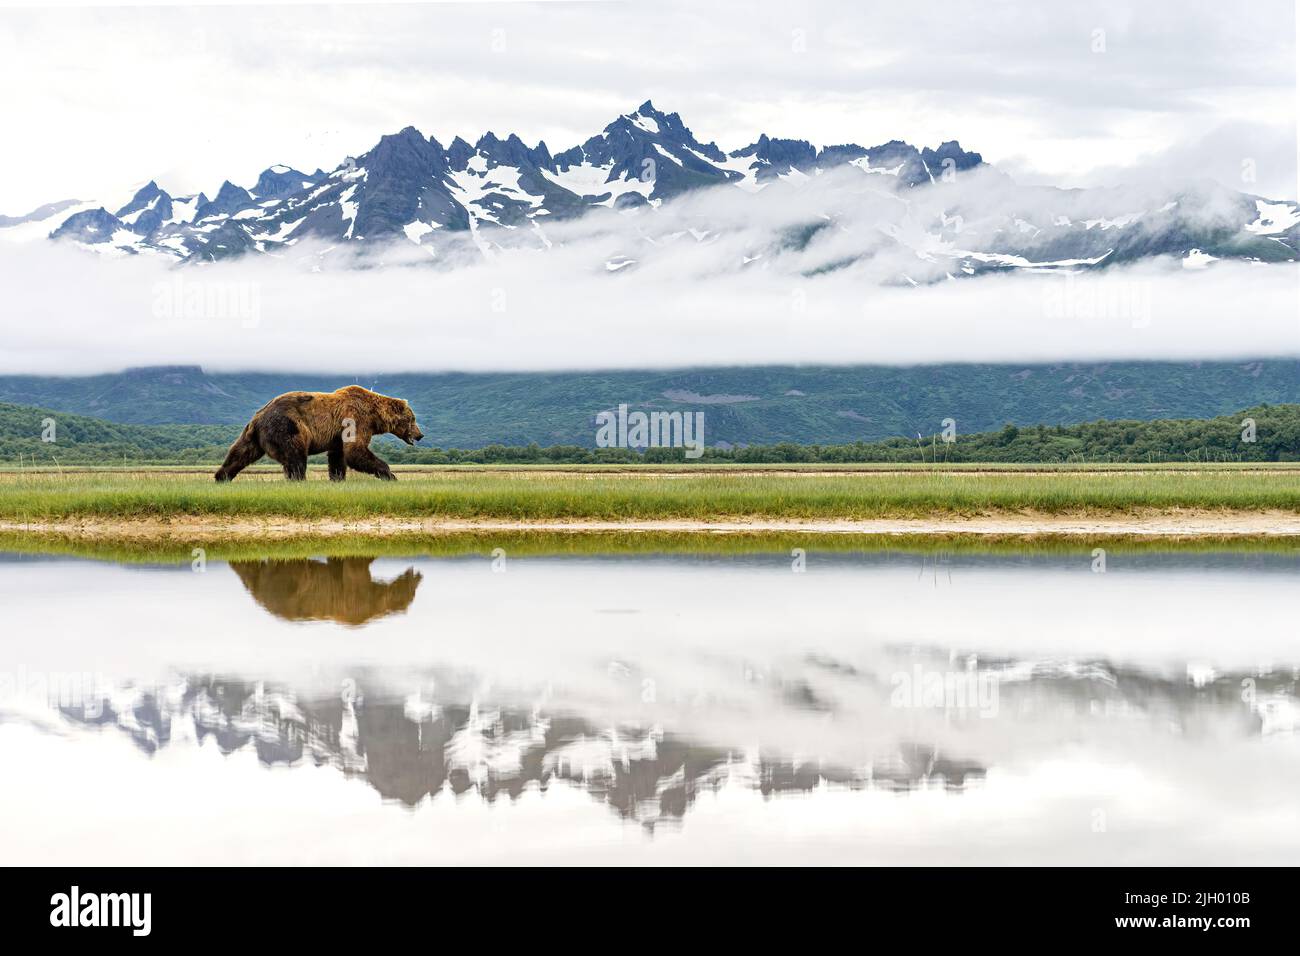 Brown bear walking in front of mountains Stock Photo